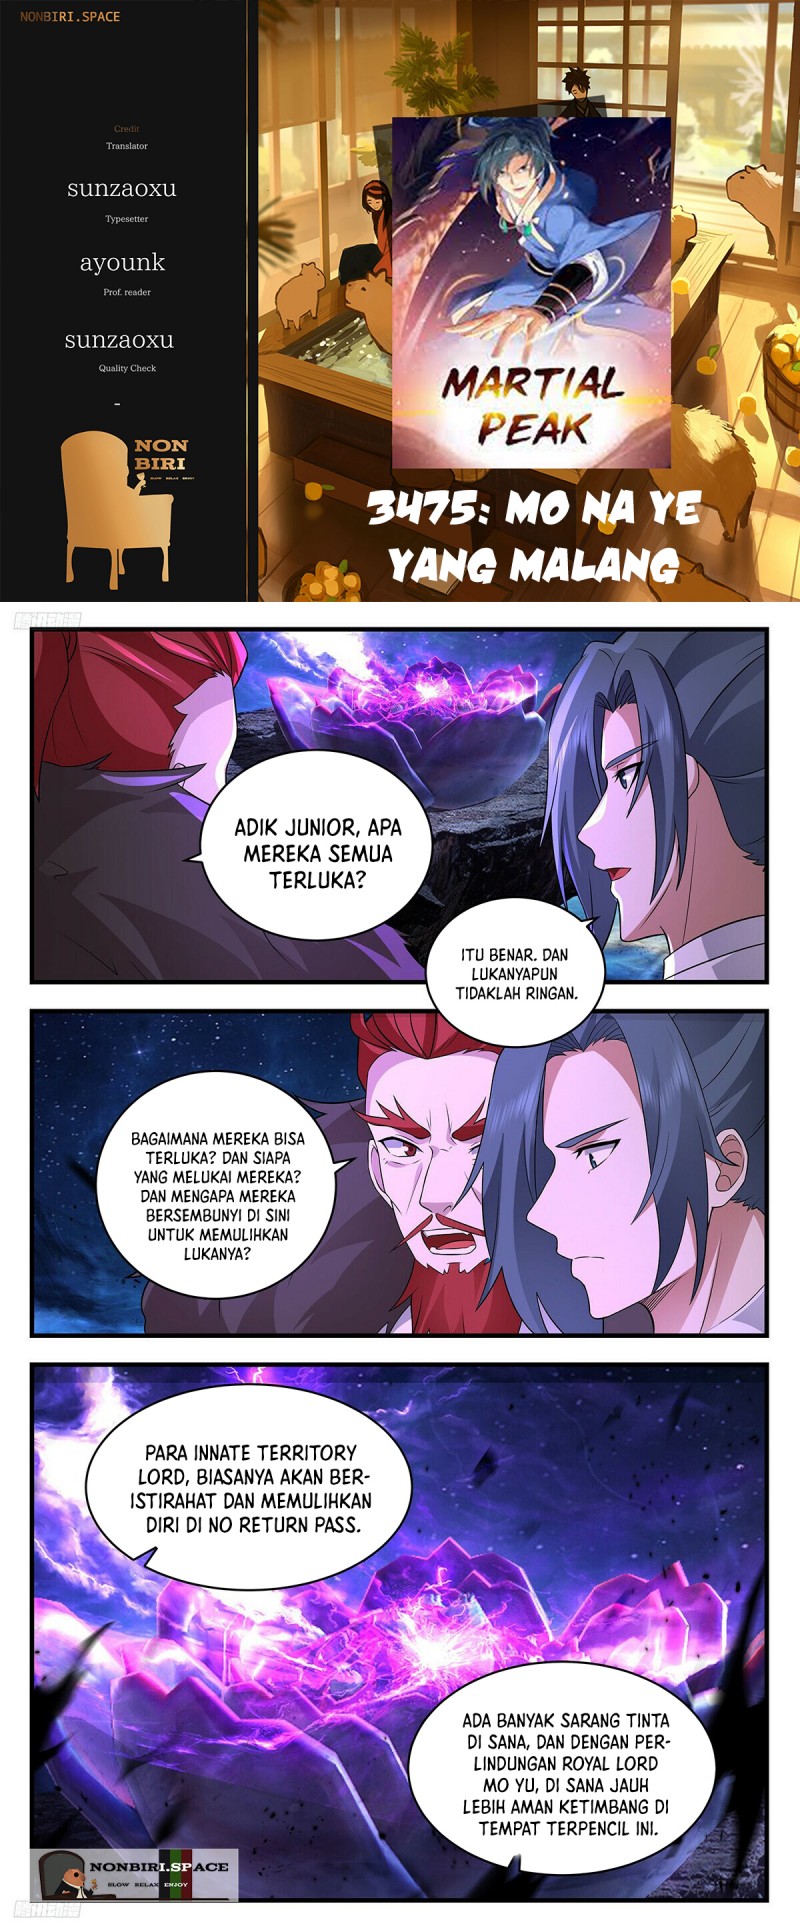 Martial Peak: Chapter 3475 - Page 1